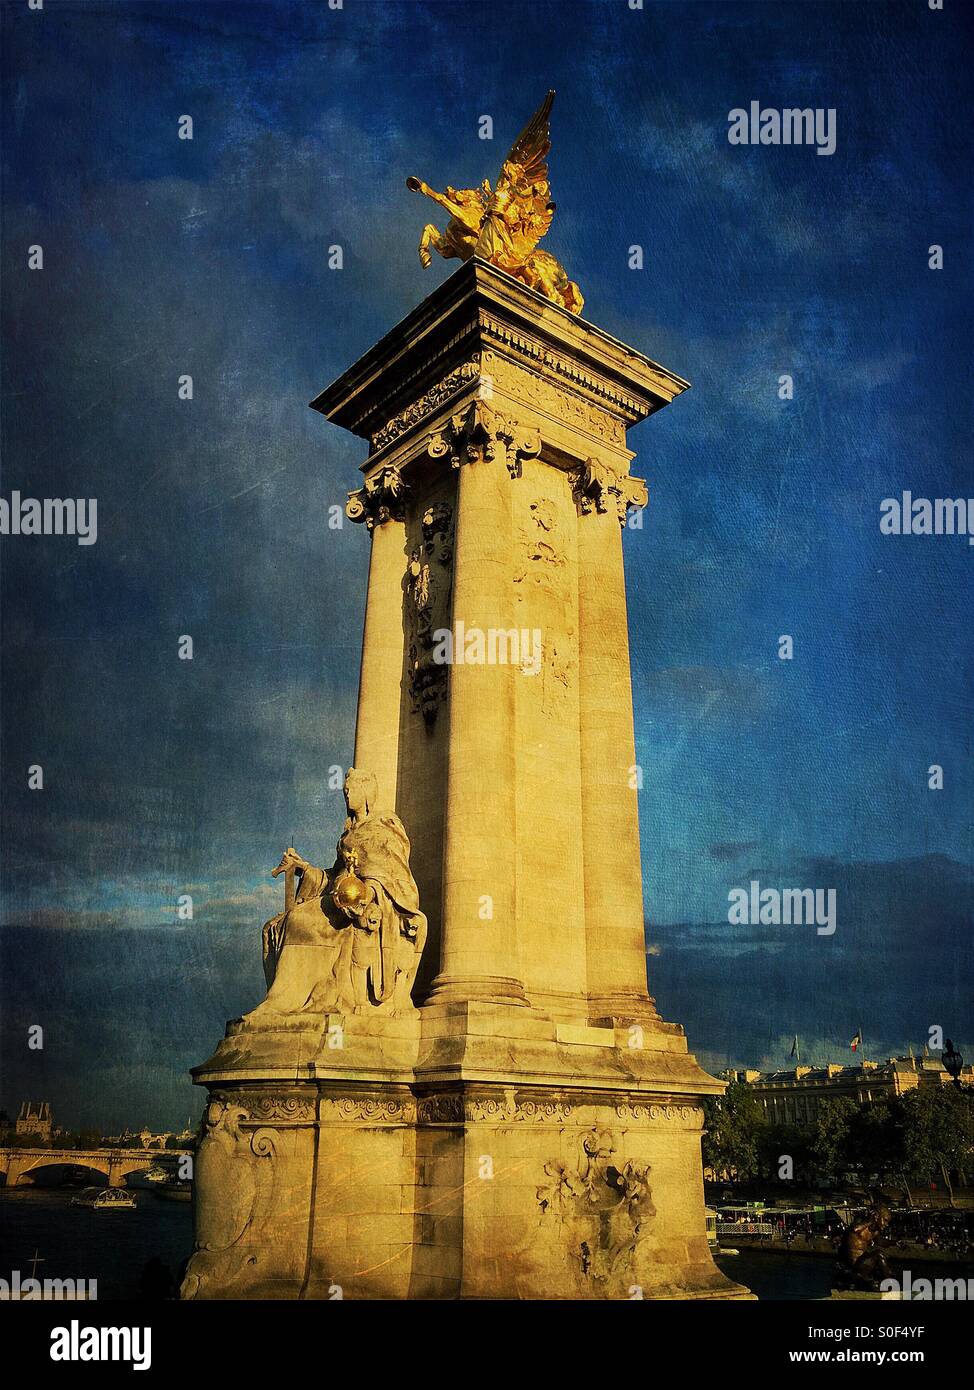 Gilt-bronze statue of a Fame restraining Pegasus watches over the Pont Alexandre III bridge, supported on massive masonry socles. Paris, France. French Monument historique. Vintage texture overlay. Stock Photo